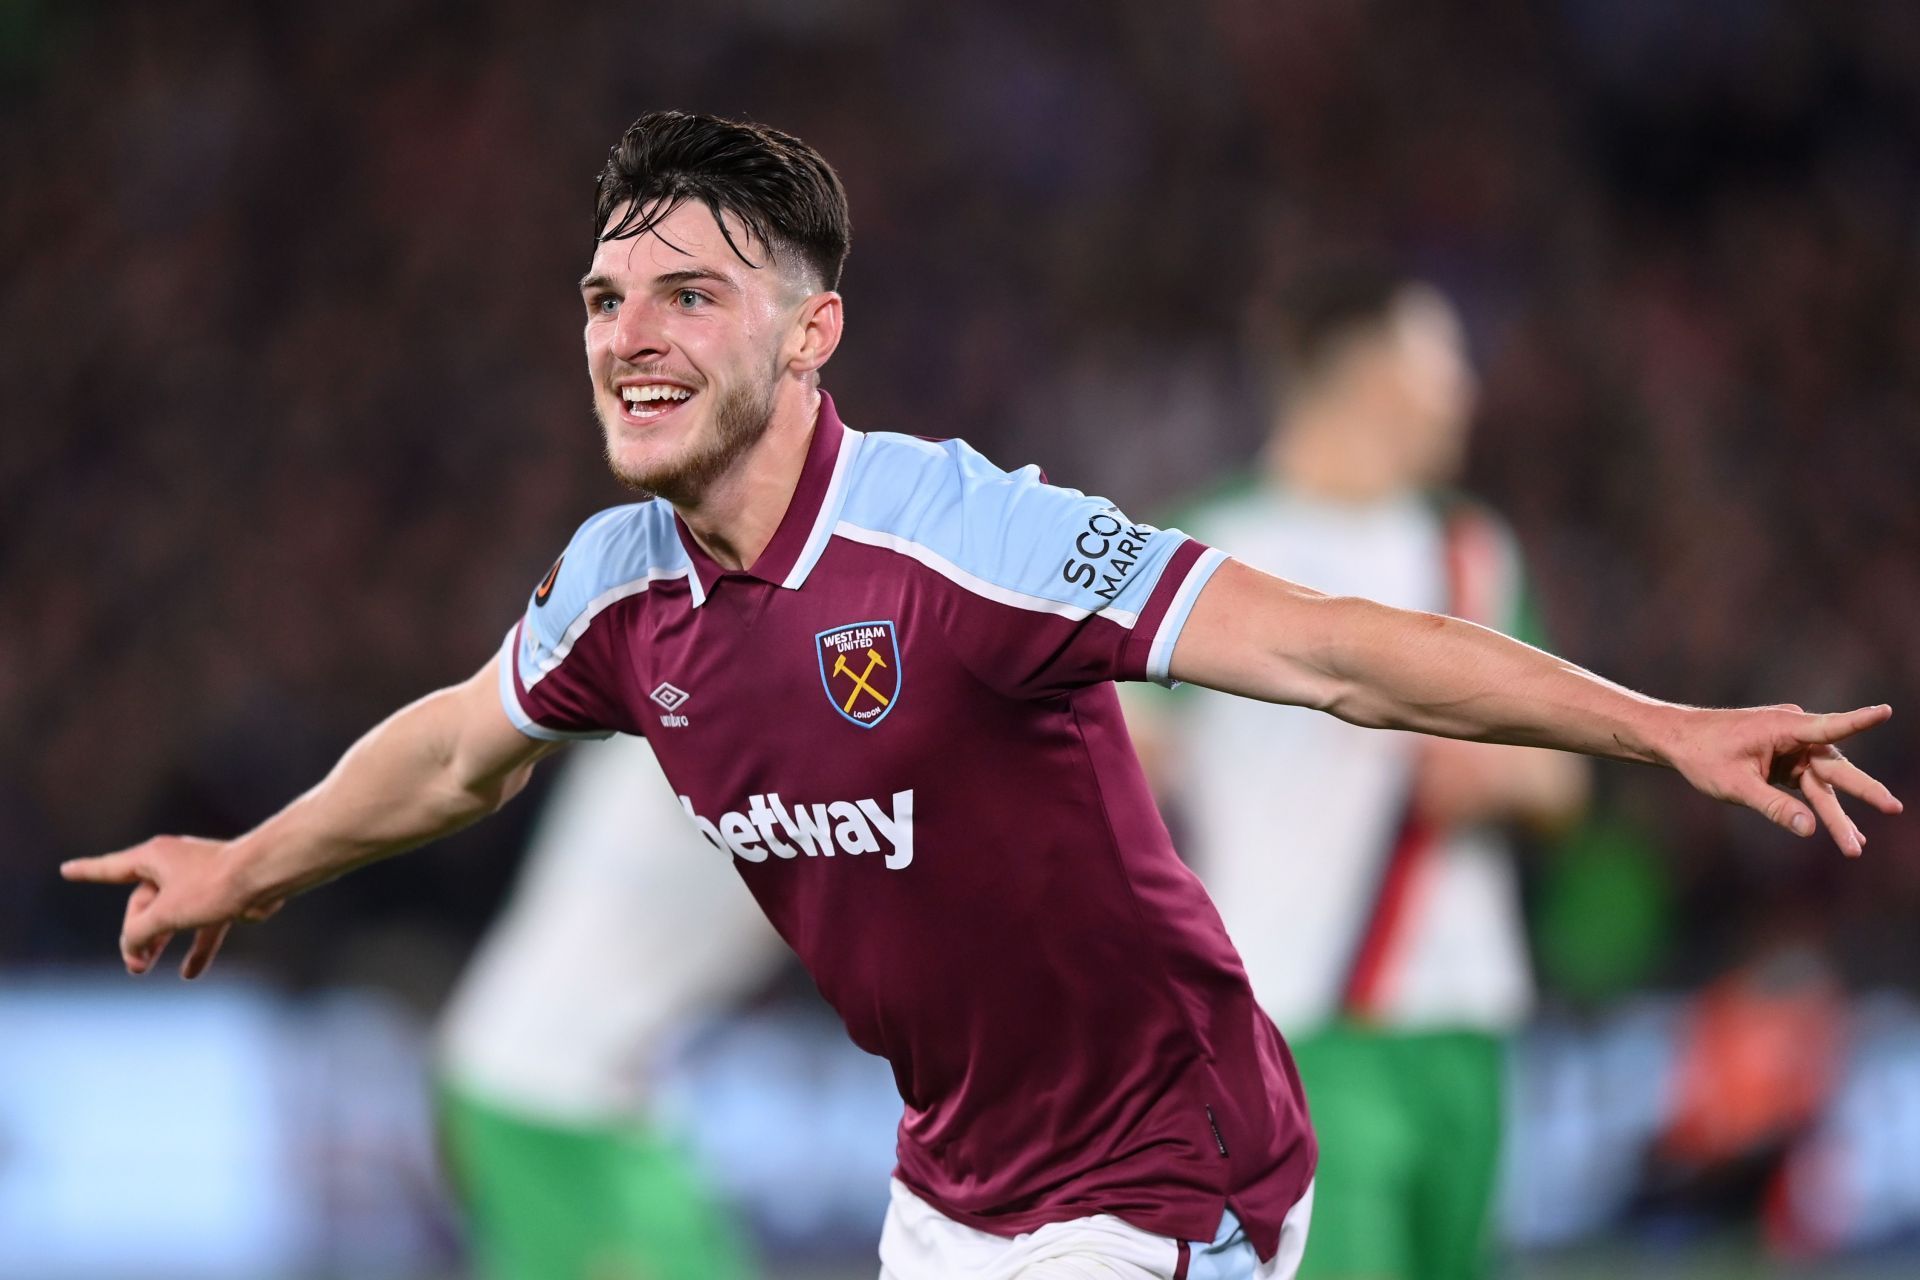 Rice looks set to depart West Ham in the near future